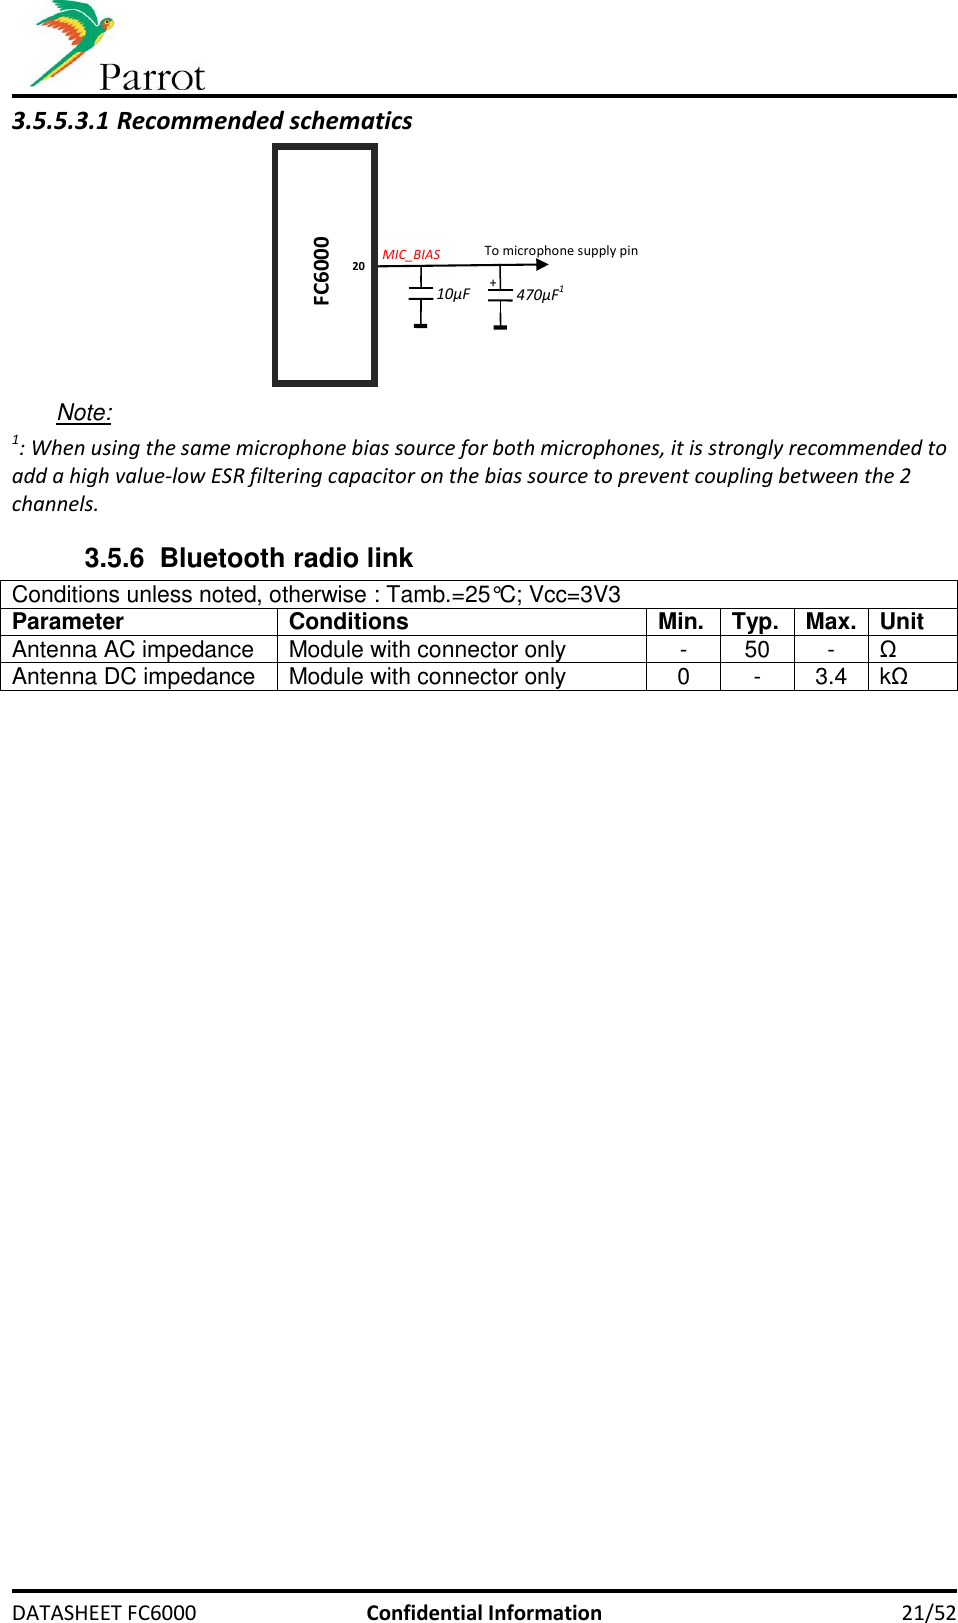     DATASHEET FC6000  Confidential Information 21/52 3.5.5.3.1 Recommended schematics    Note: 1: When using the same microphone bias source for both microphones, it is strongly recommended to add a high value-low ESR filtering capacitor on the bias source to prevent coupling between the 2 channels. 3.5.6 Bluetooth radio link Conditions unless noted, otherwise : Tamb.=25°C; Vcc=3V3 Parameter Conditions Min. Typ. Max. Unit Antenna AC impedance Module with connector only - 50 - Ω Antenna DC impedance Module with connector only 0 - 3.4 kΩ FC6000 MIC_BIAS 470µF1 To microphone supply pin + 20 10µF 